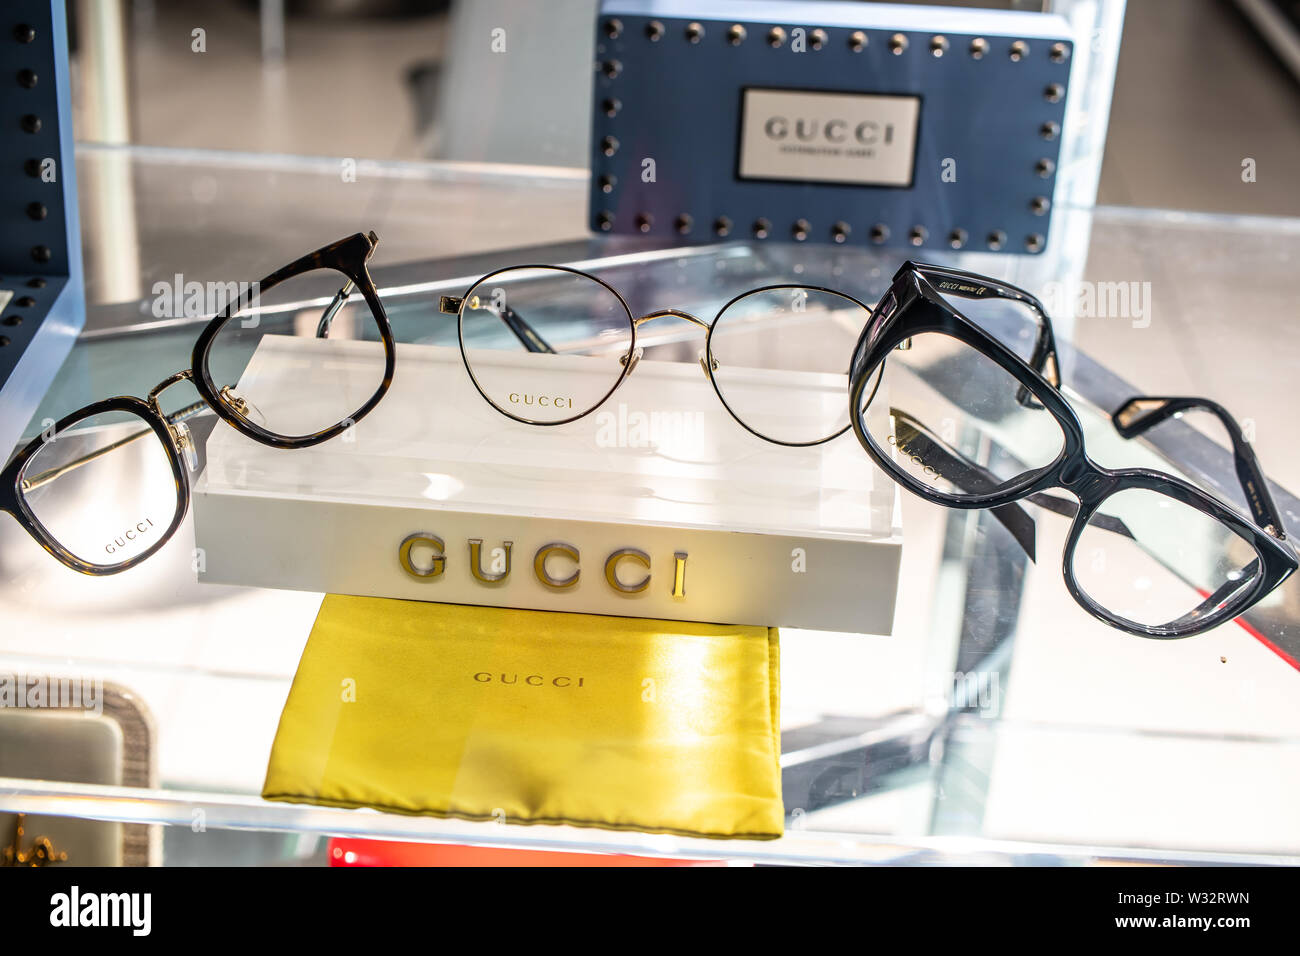 Geneva, March 2019, Gucci sunglasses on display for sale, Eyewear Collections, Elegant, timeless original Gucci glasses created for men and women Stock Photo